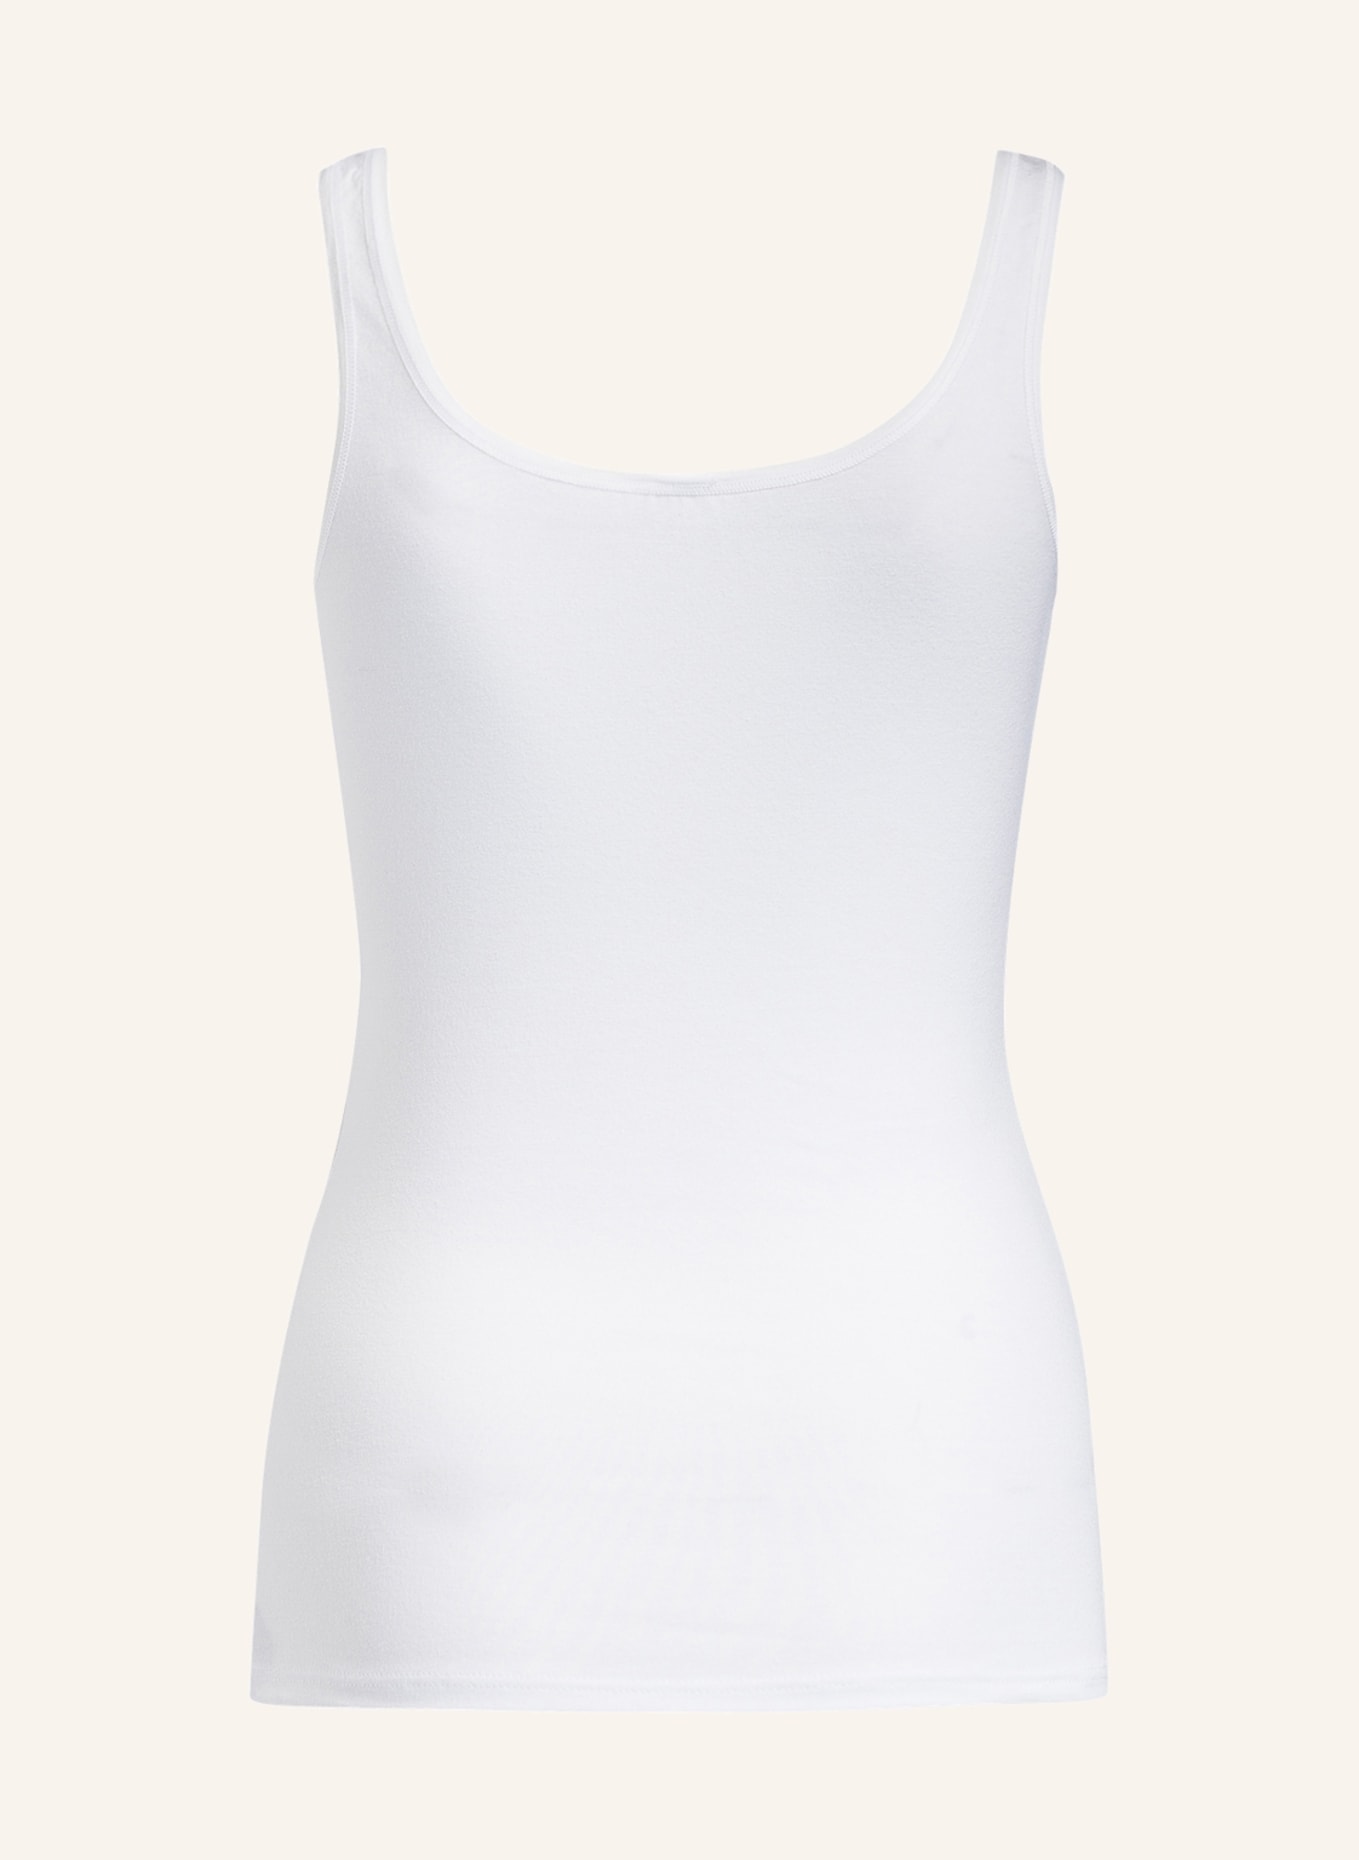 Skiny 2 pack of tops ADVANTAGE COTTON, Color: WHITE (Image 2)